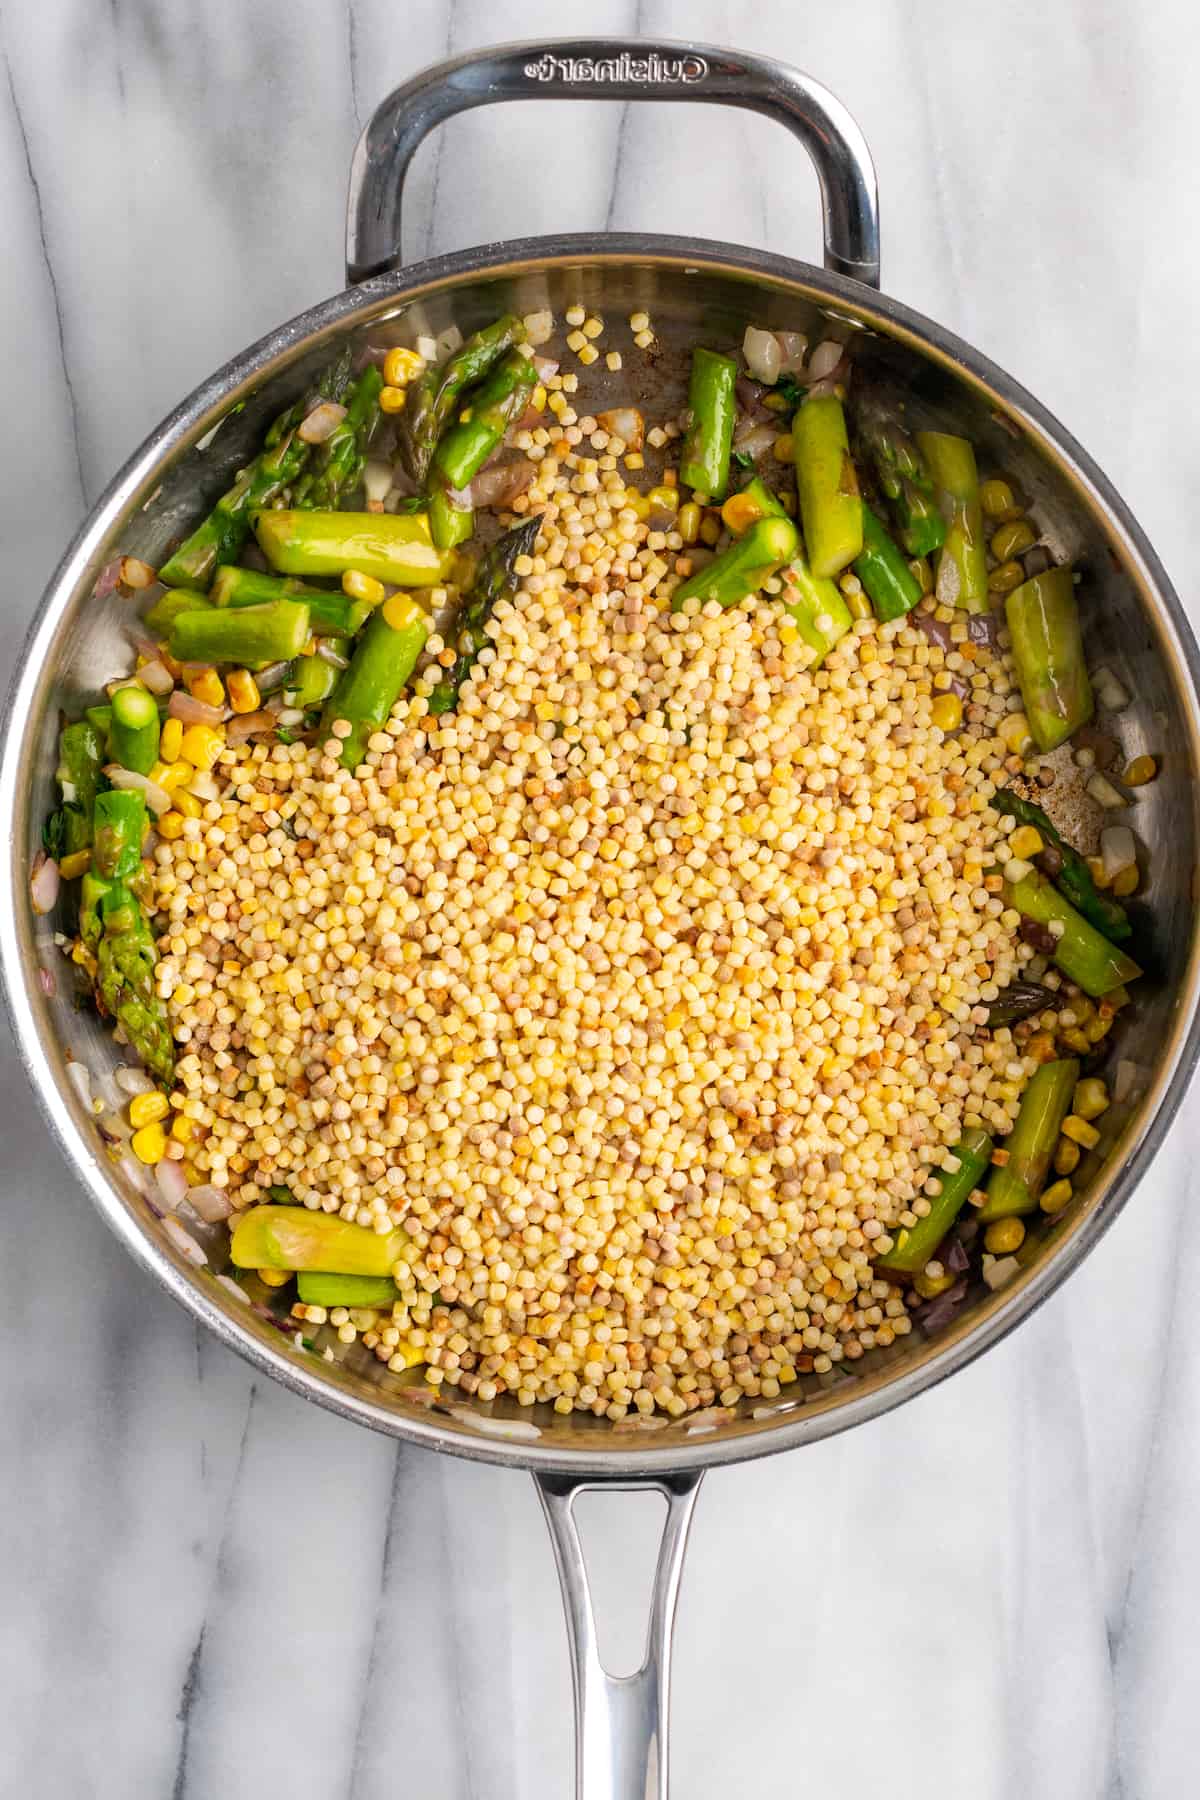 Overhead view of fregola added to skillet of vegetables